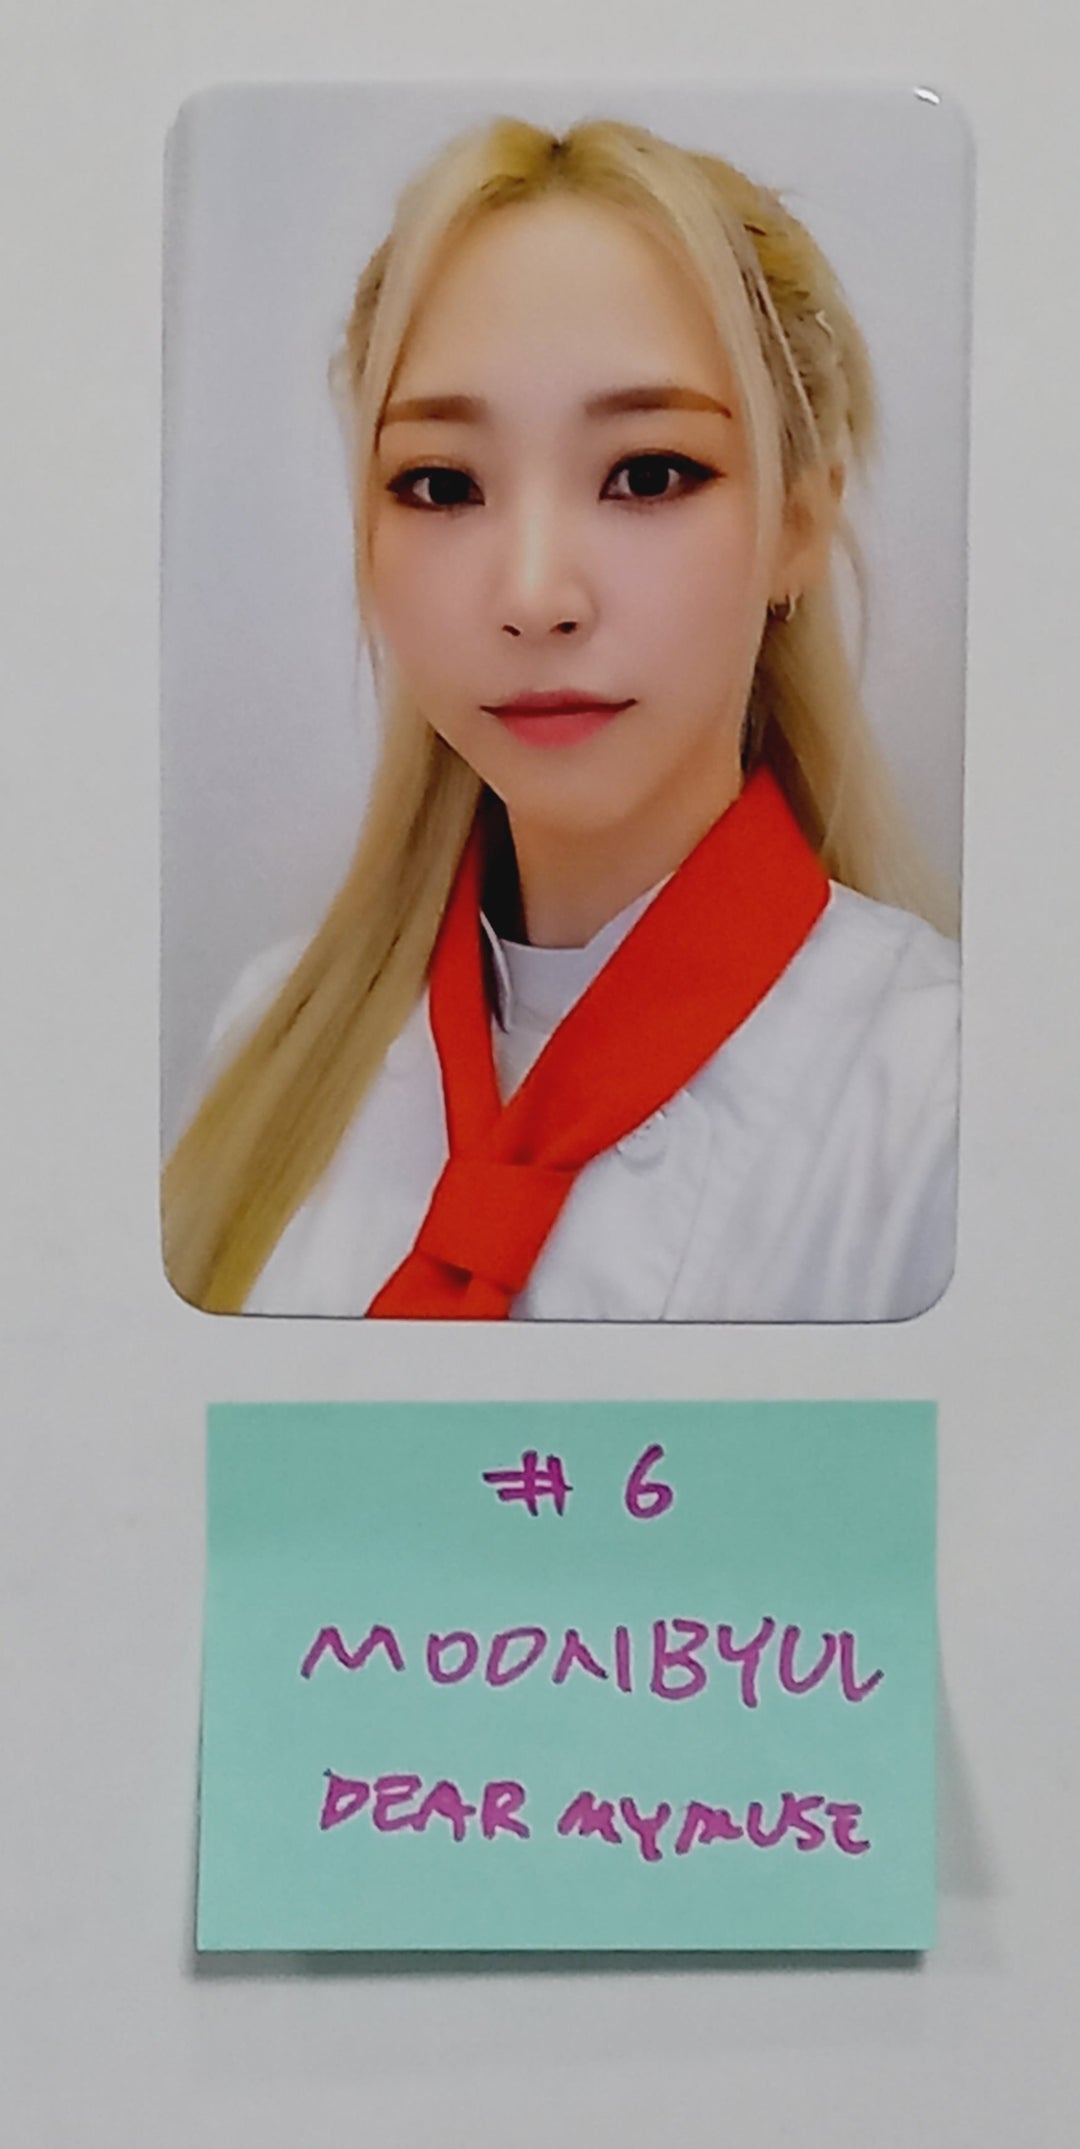 MOONBYUL "Starlit of Muse" - Dear My Muse Fansign Event Photocard Round 2 [24.3.25]